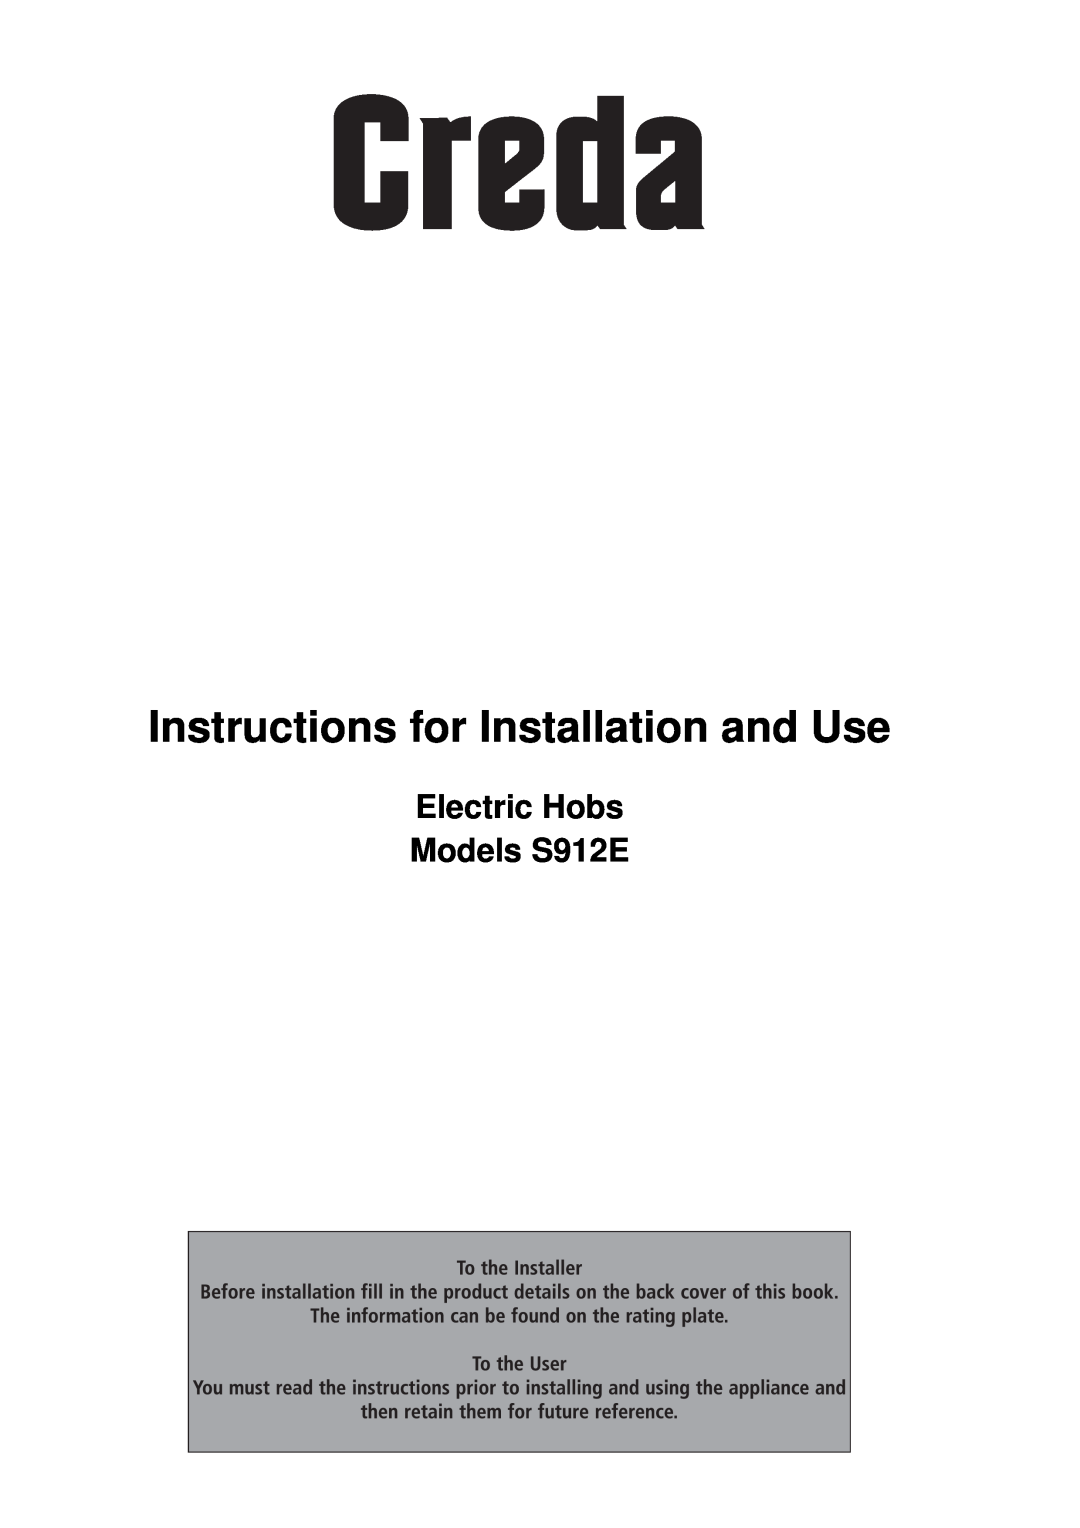 Creda manual Electric Hobs Models S912E, Instructions for Installation and Use 